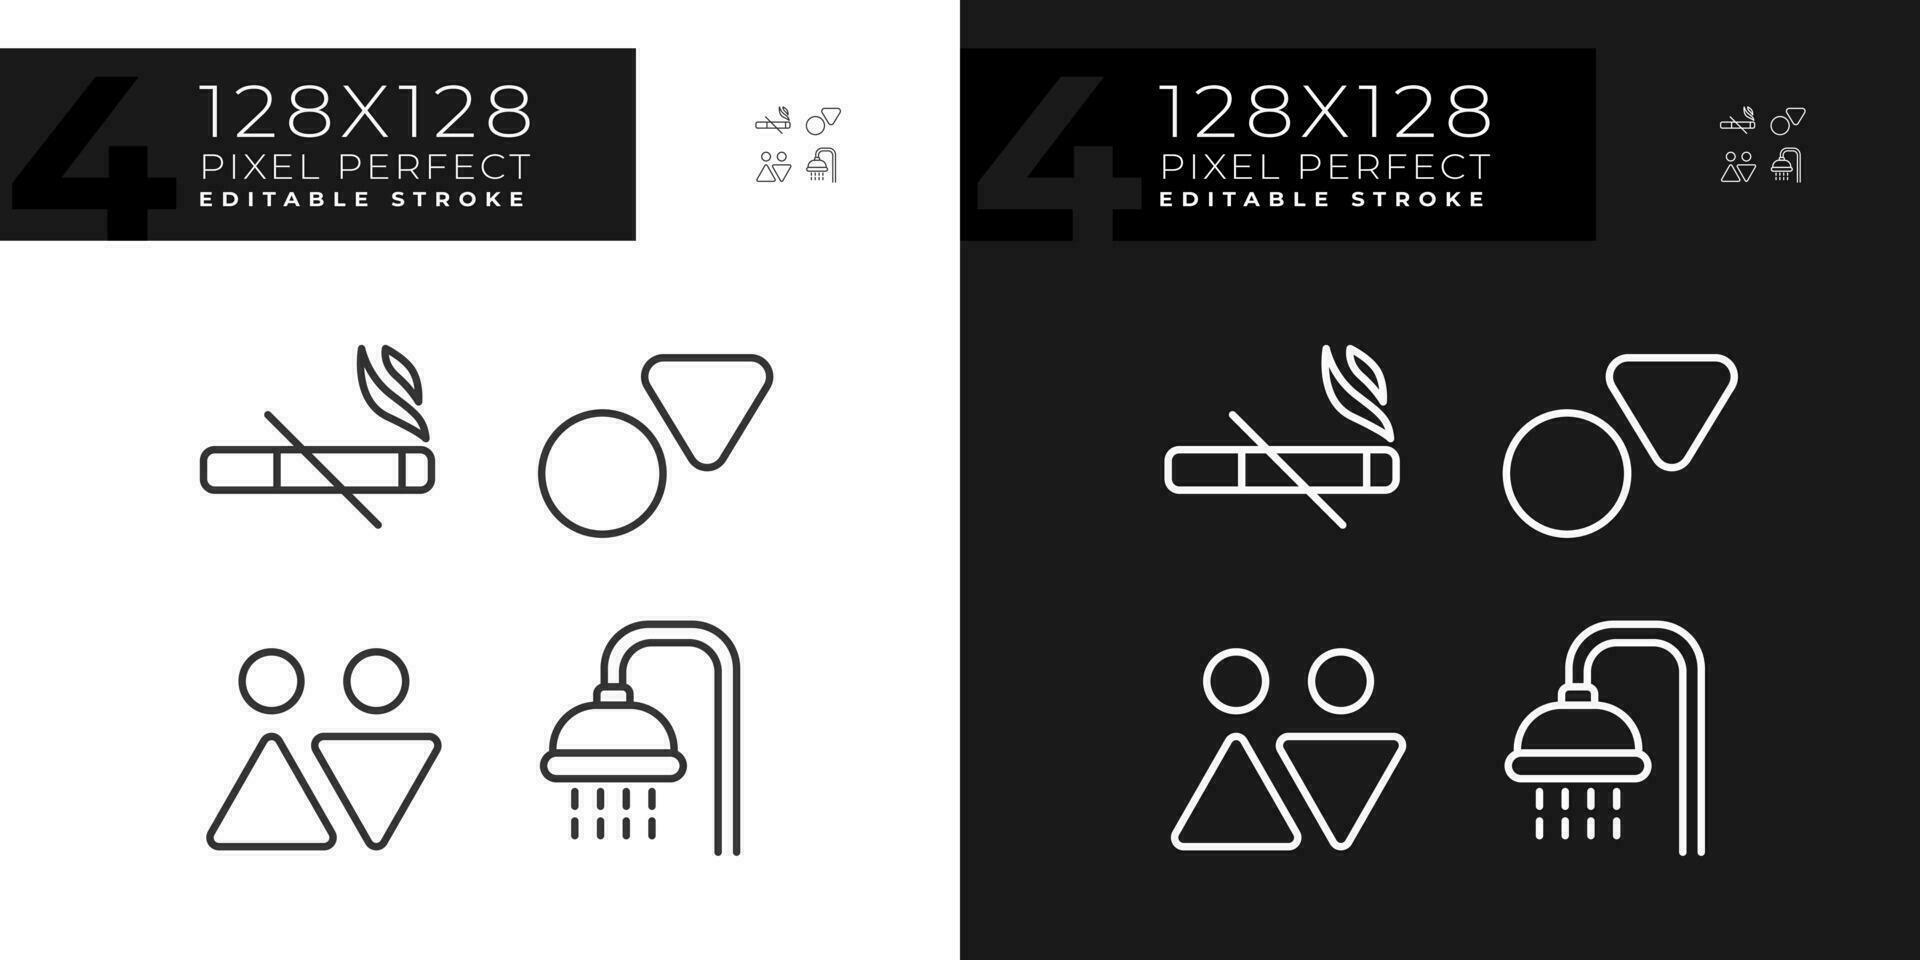 Toilet signs and service pixel perfect linear icons set for dark, light mode. Smoke prohibition in public restroom. Thin line symbols for night, day theme. Isolated illustrations. Editable stroke vector